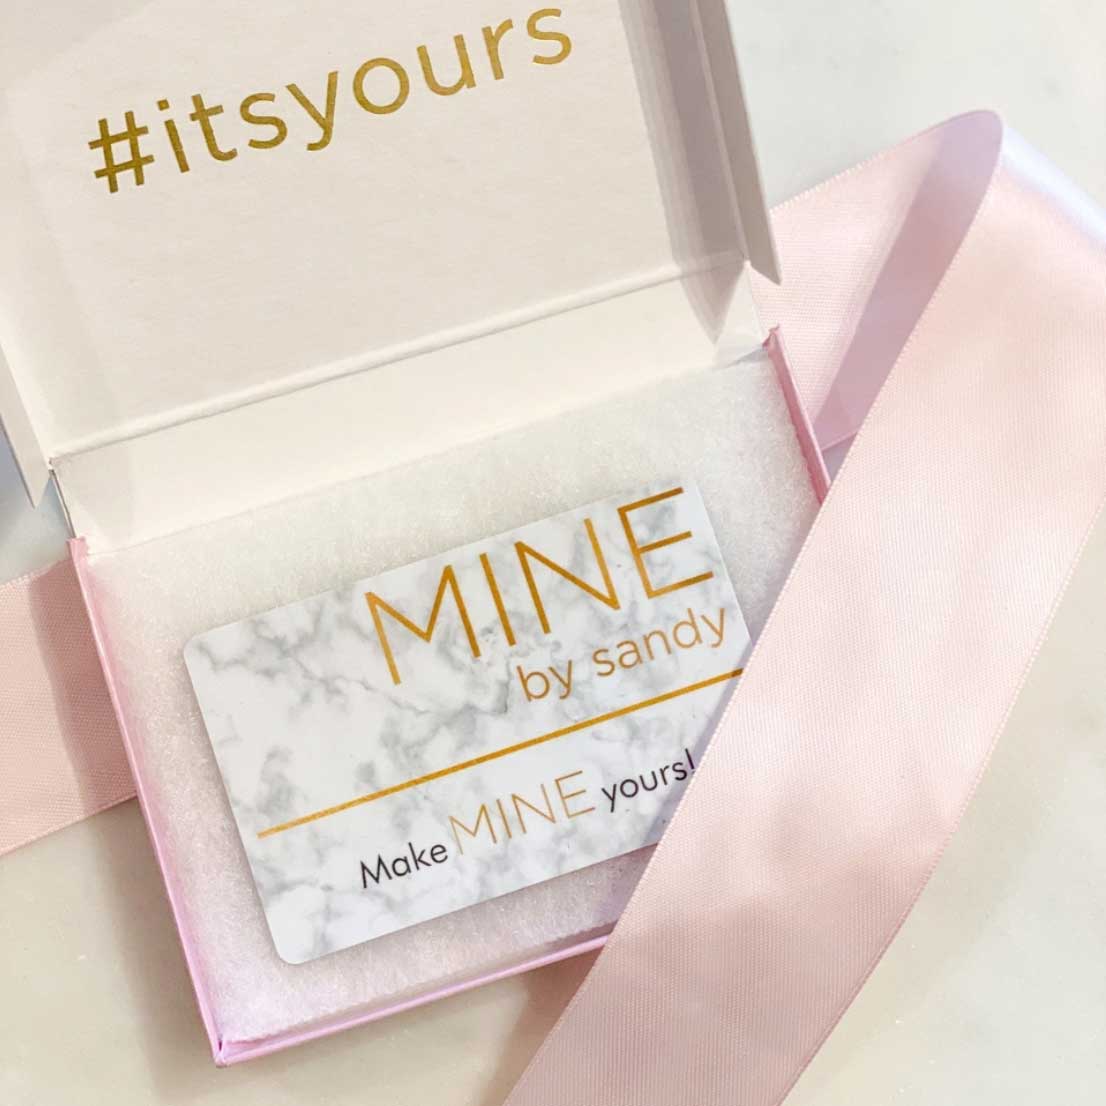 MINE by sandy gift card